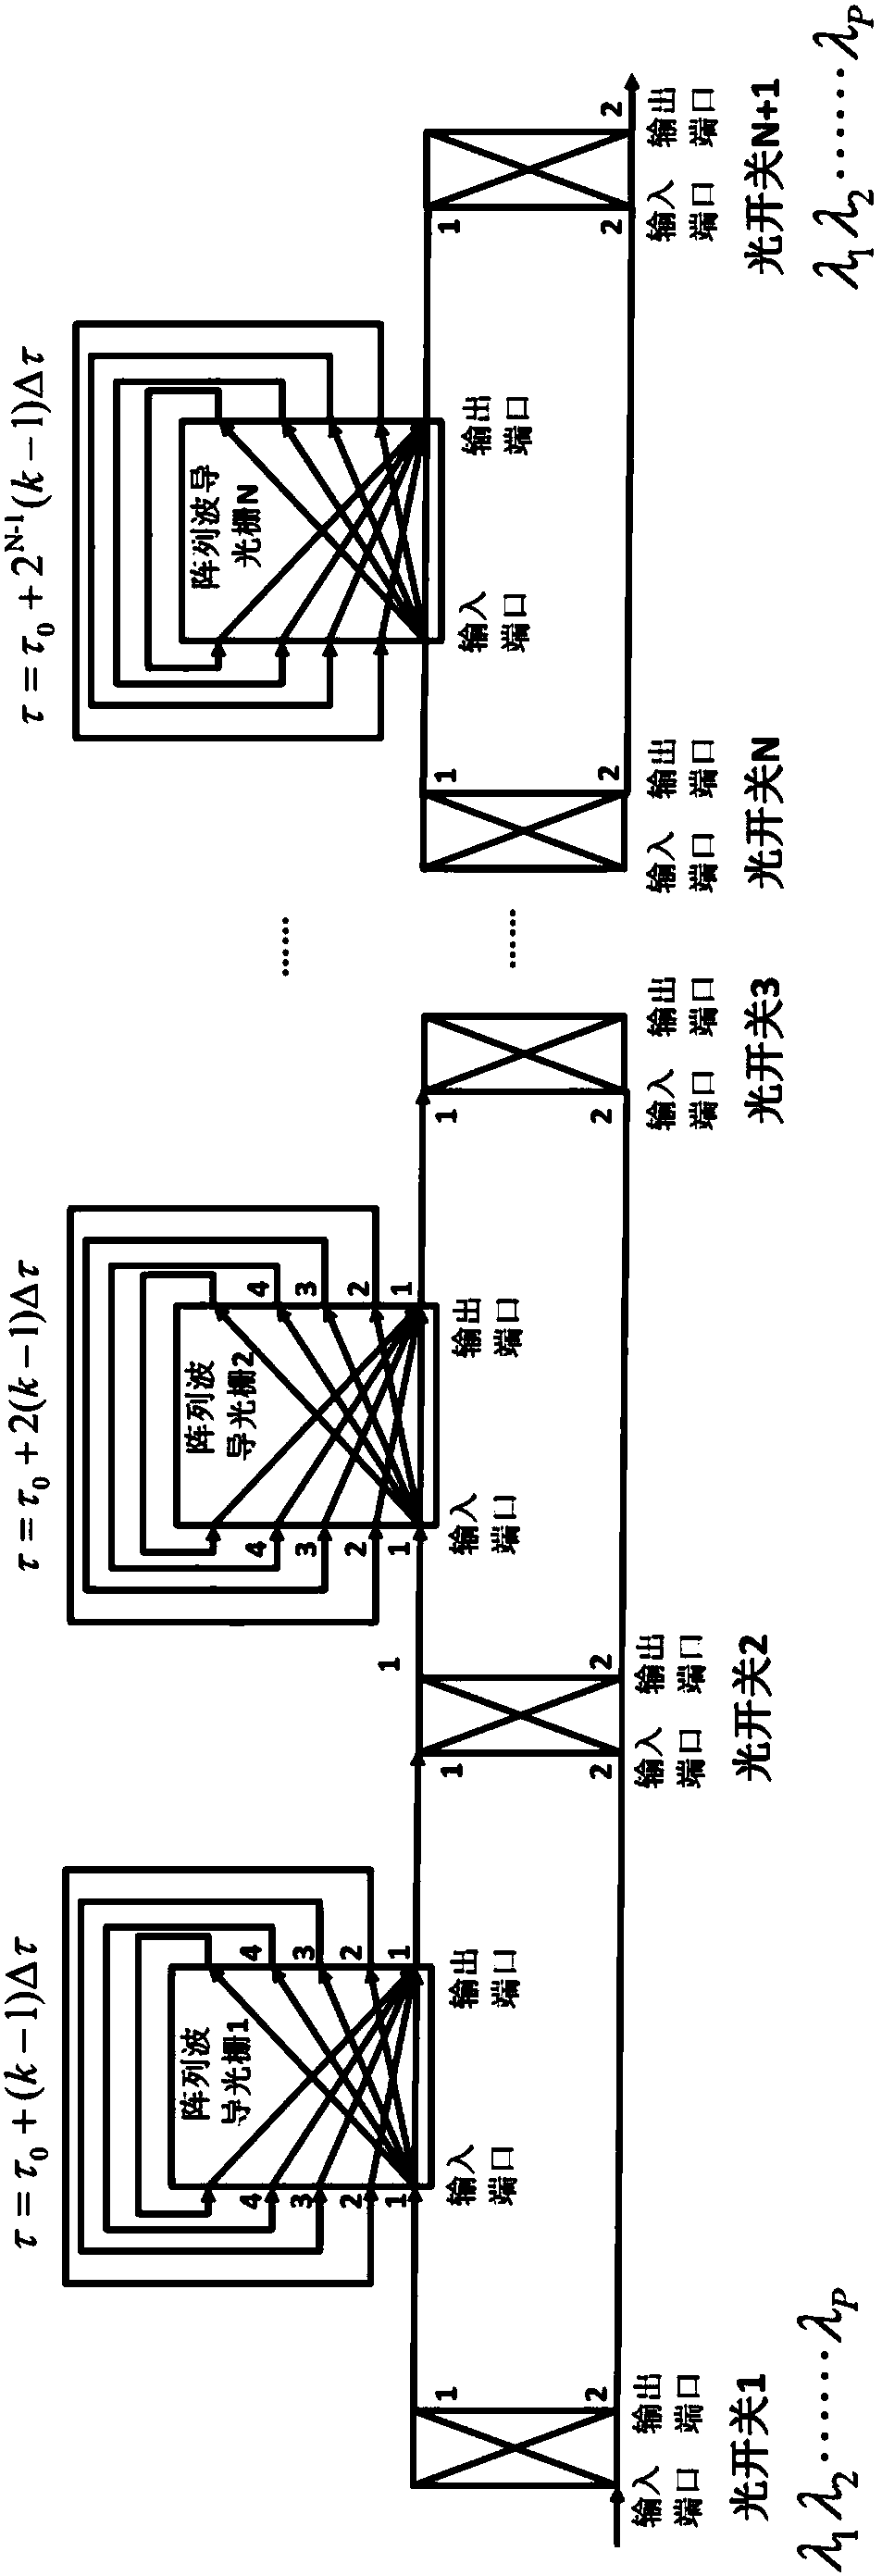 Radio-over-fibre beamforming device based on array waveguide grating (AWG) and method thereof